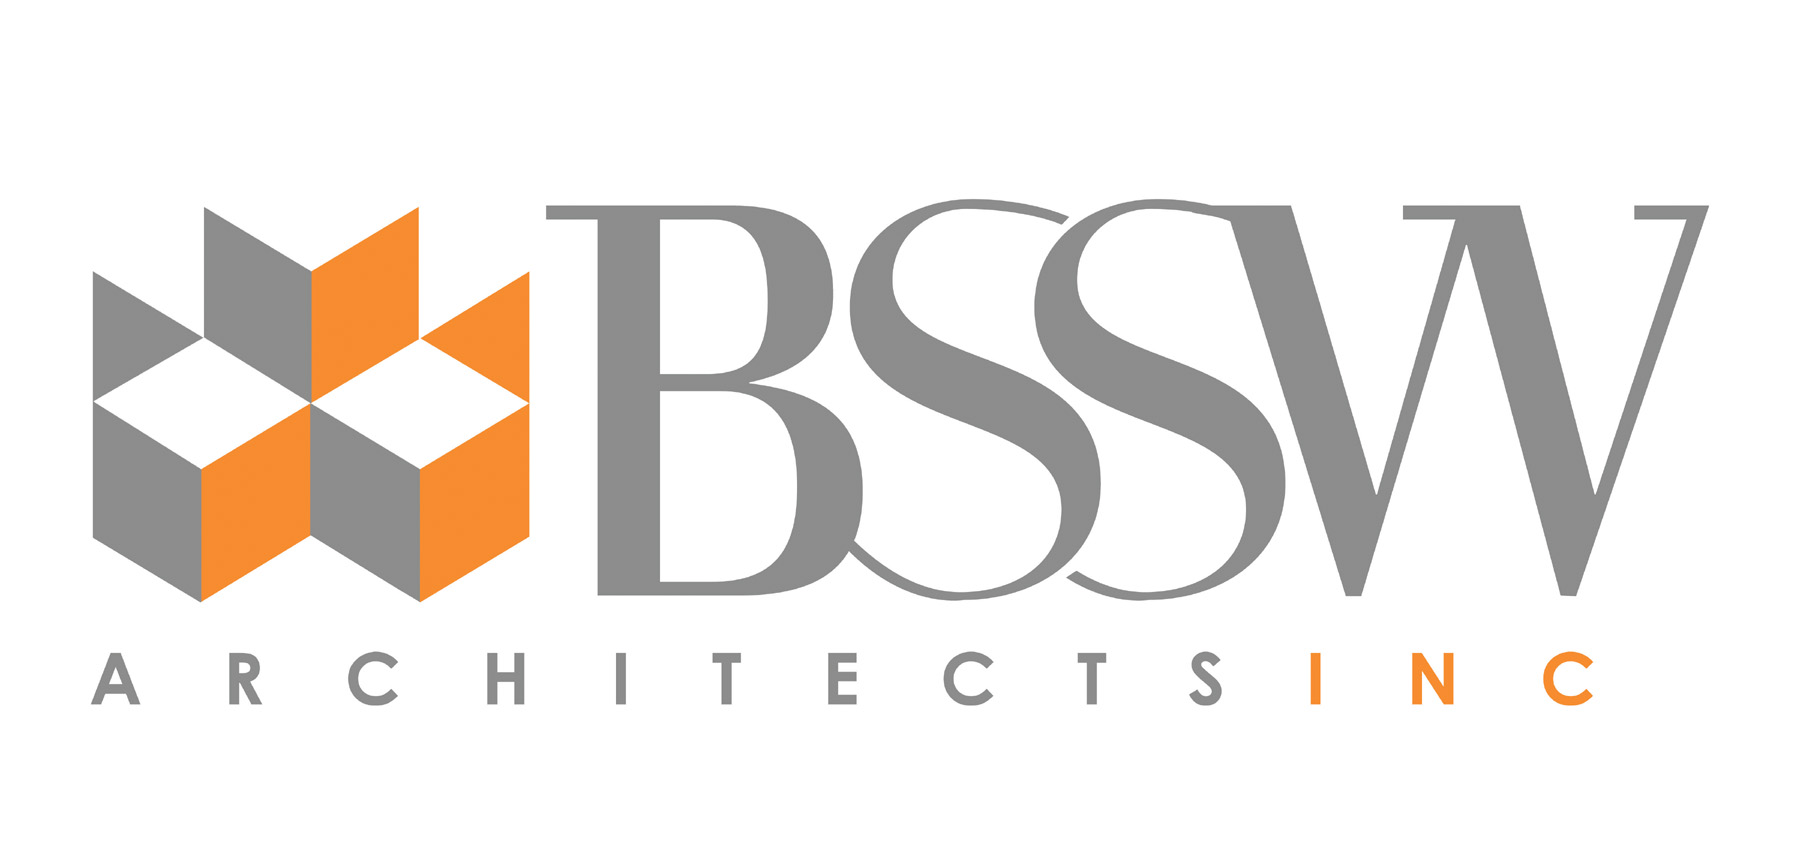 BSSW Architects, Inc.